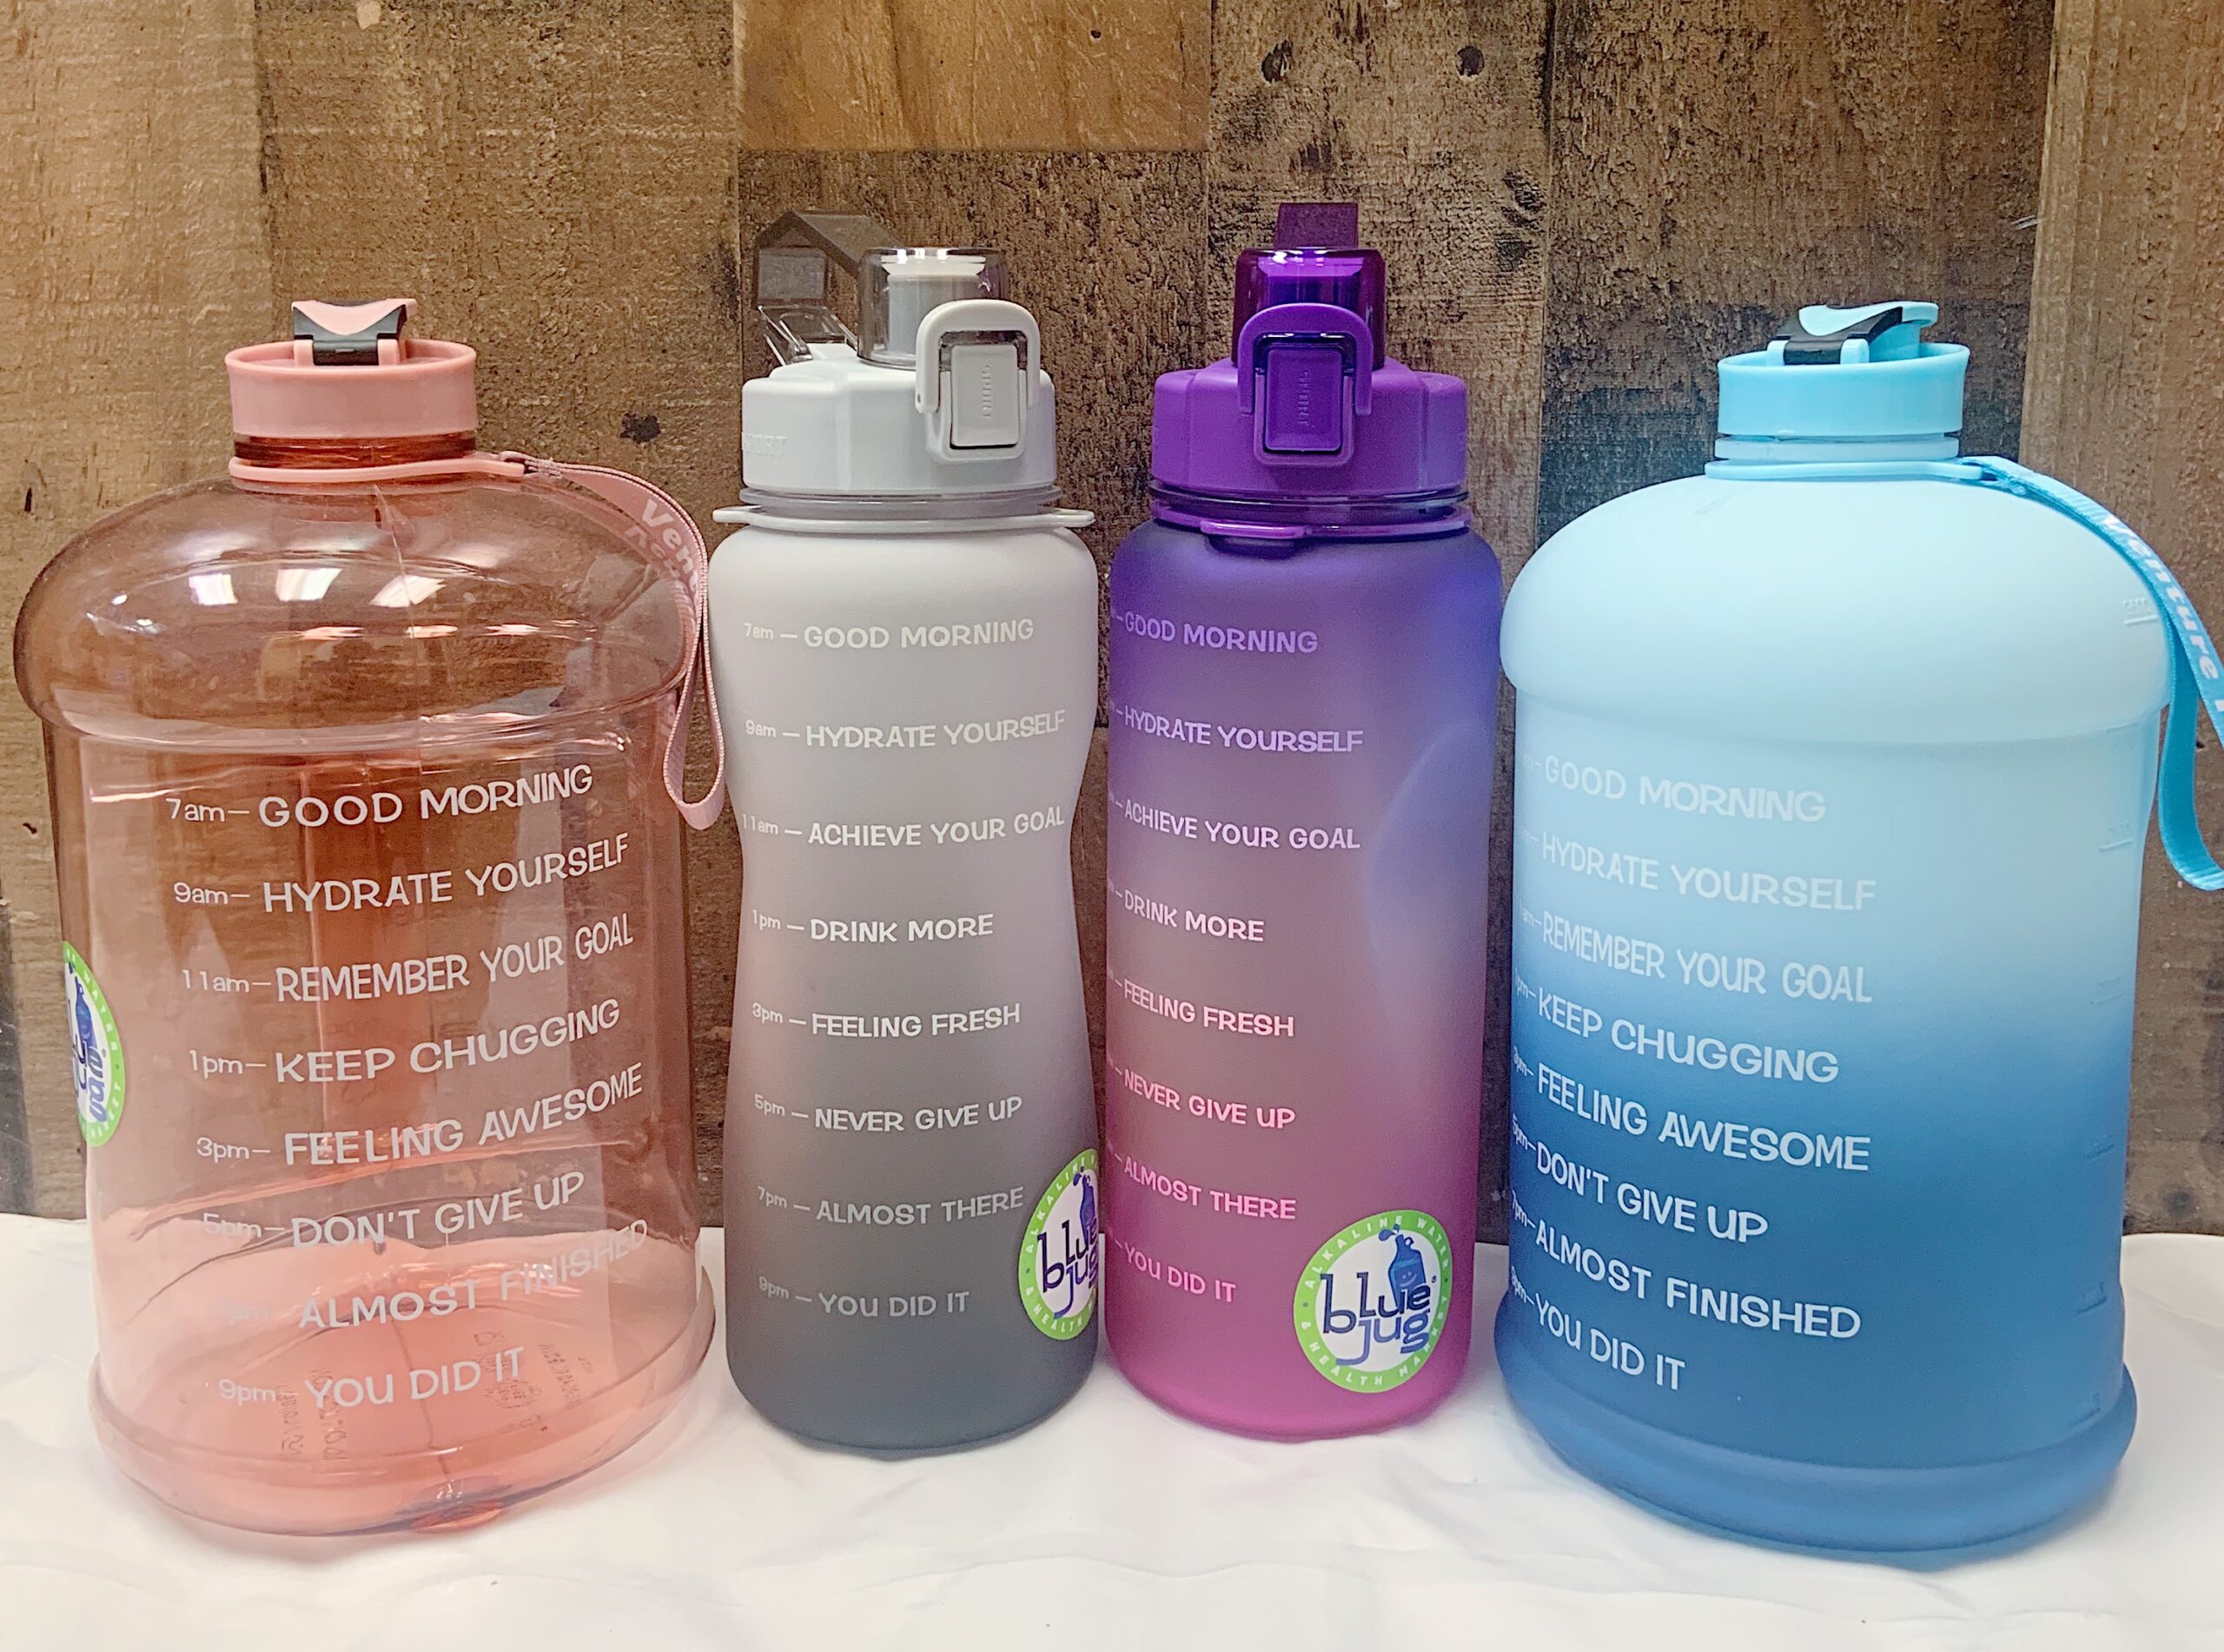 Water bottles designed for goal measurement, available in a range of colors to suit individual preferences. These bottles offer a practical and motivational way to track hydration